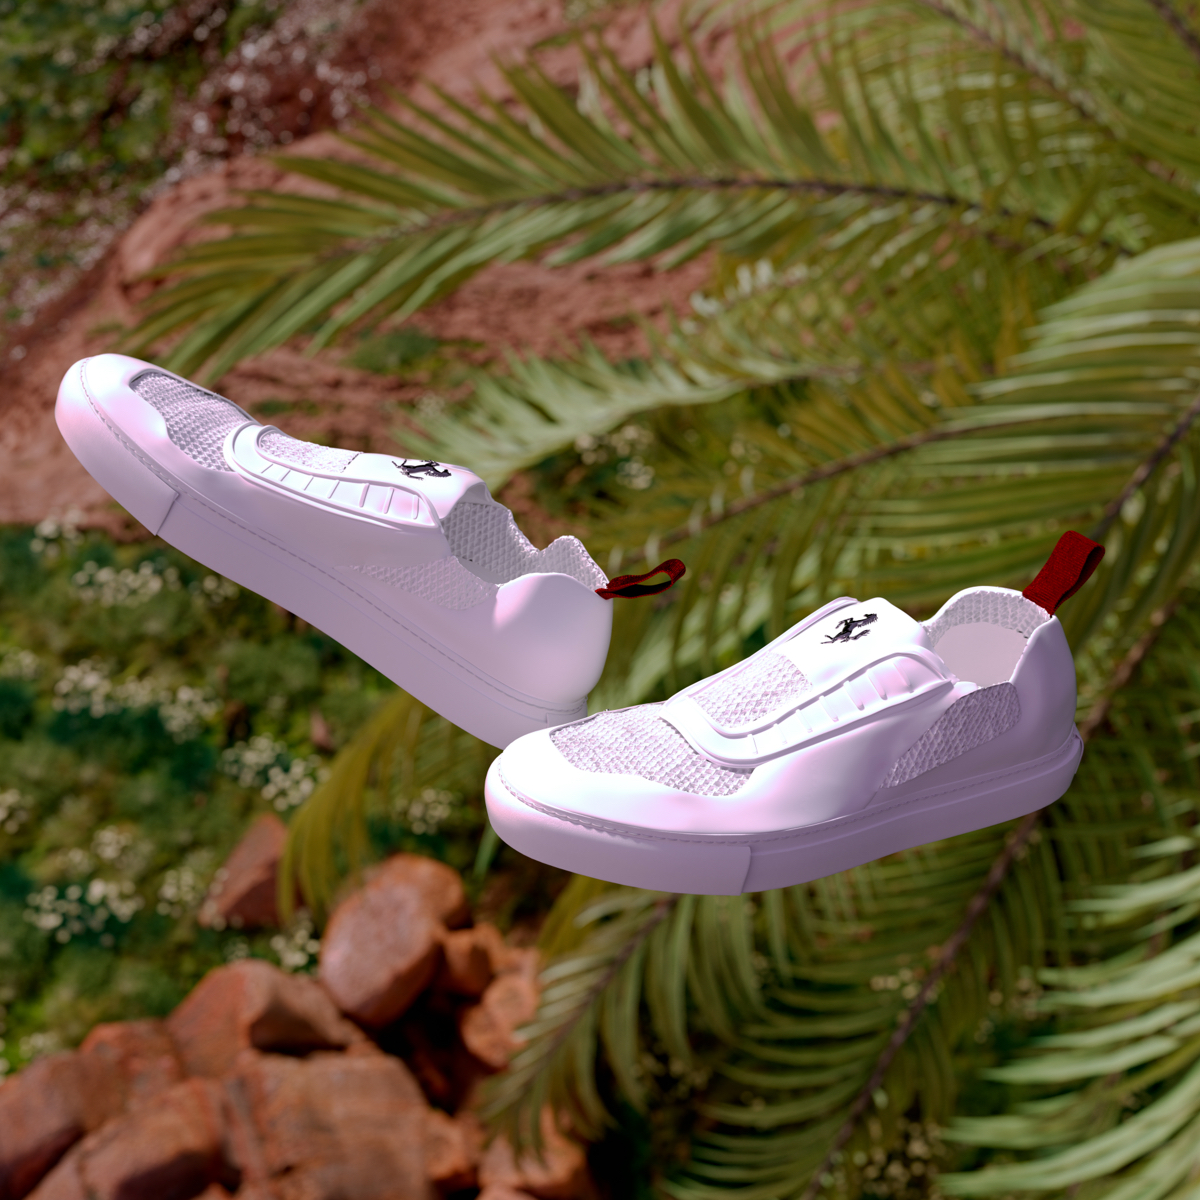 White Puma sneakers suspended in the air with palms and rocks in the background